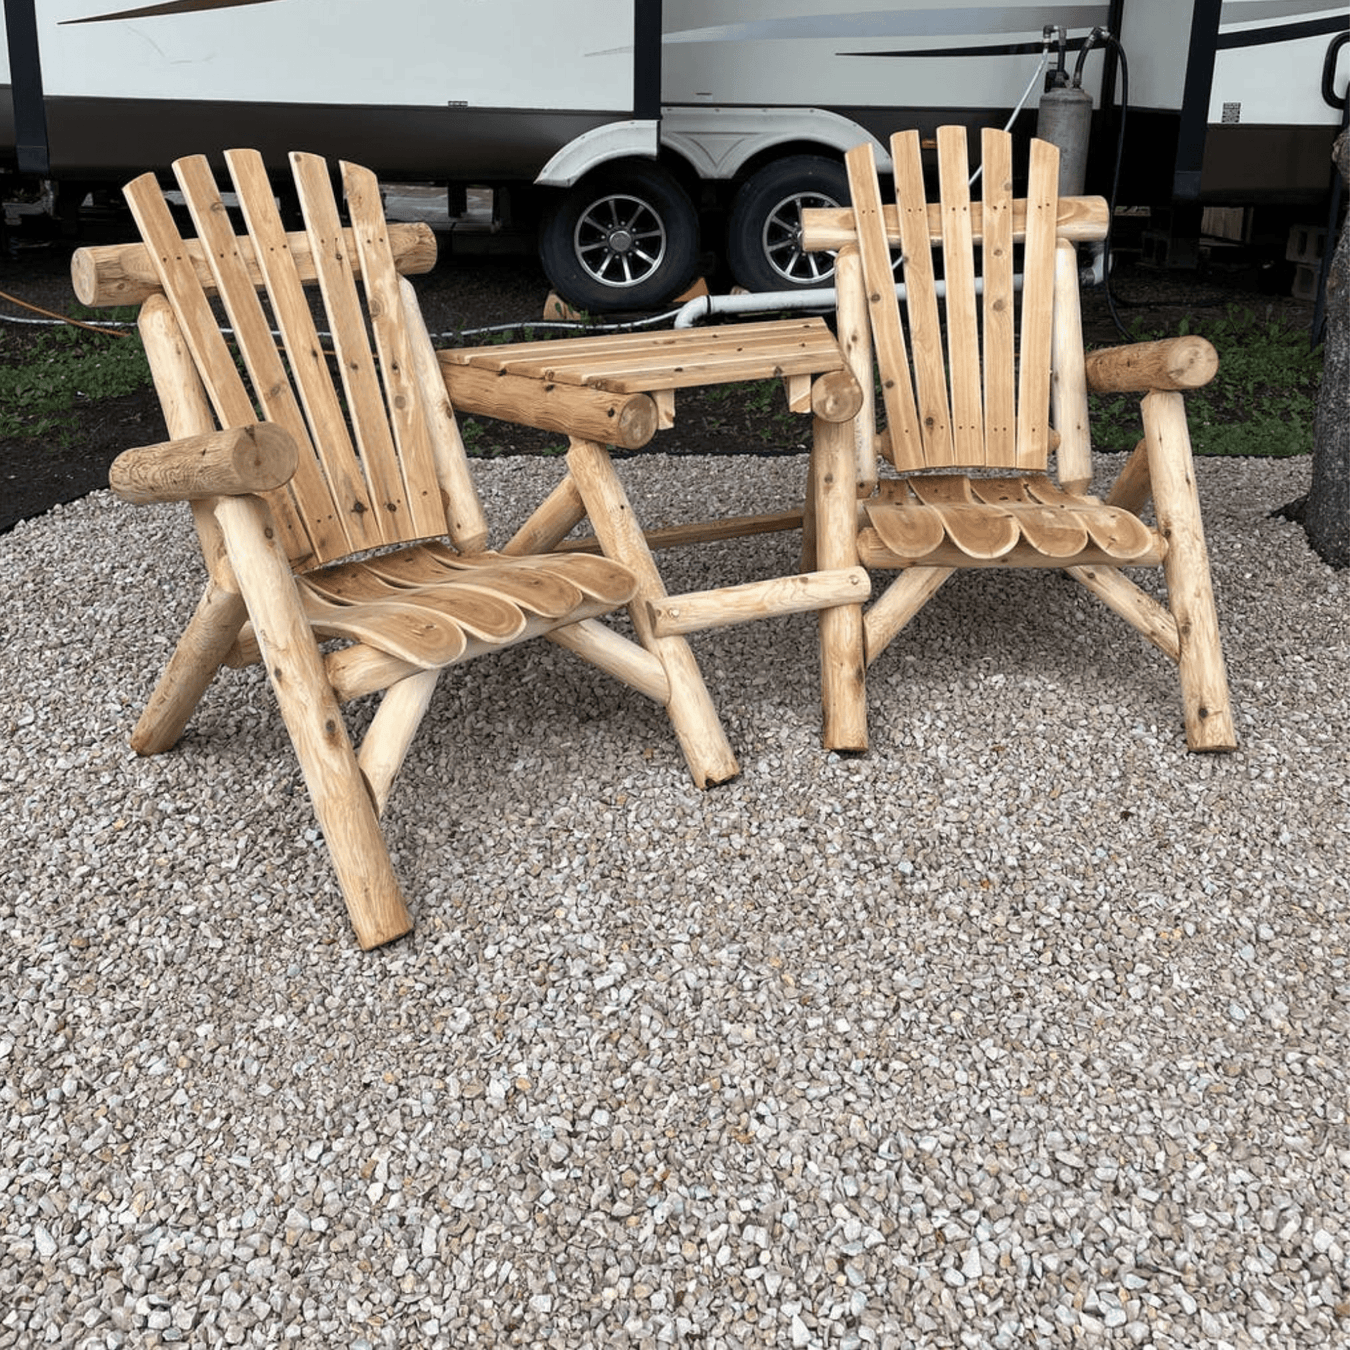 RUSTIC OUTDOOR CHAIRS